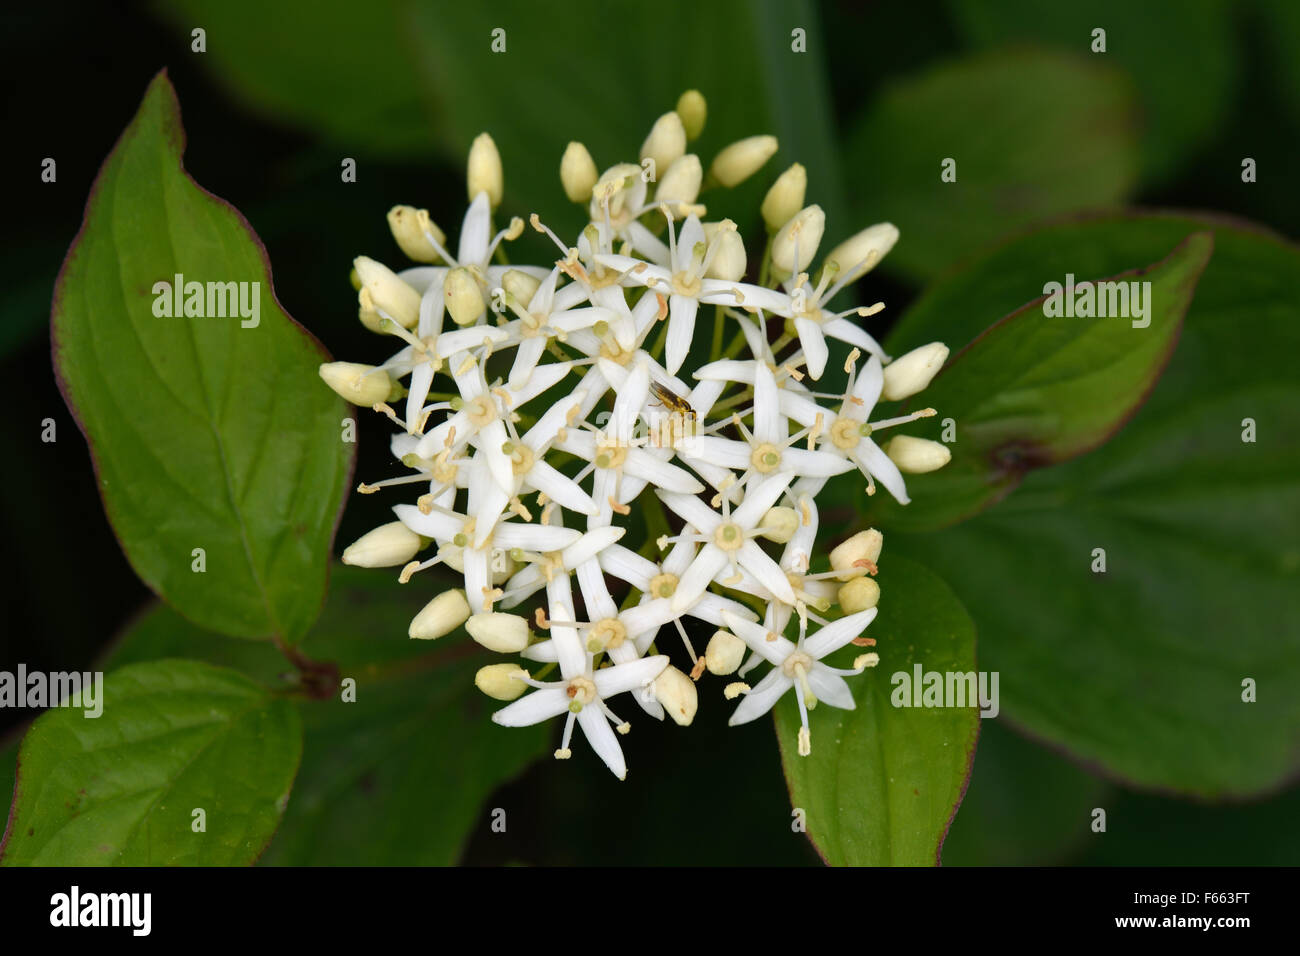 Flower and flower buds of a spindle tree, Euonymus europaeus, Berkshire, June Stock Photo